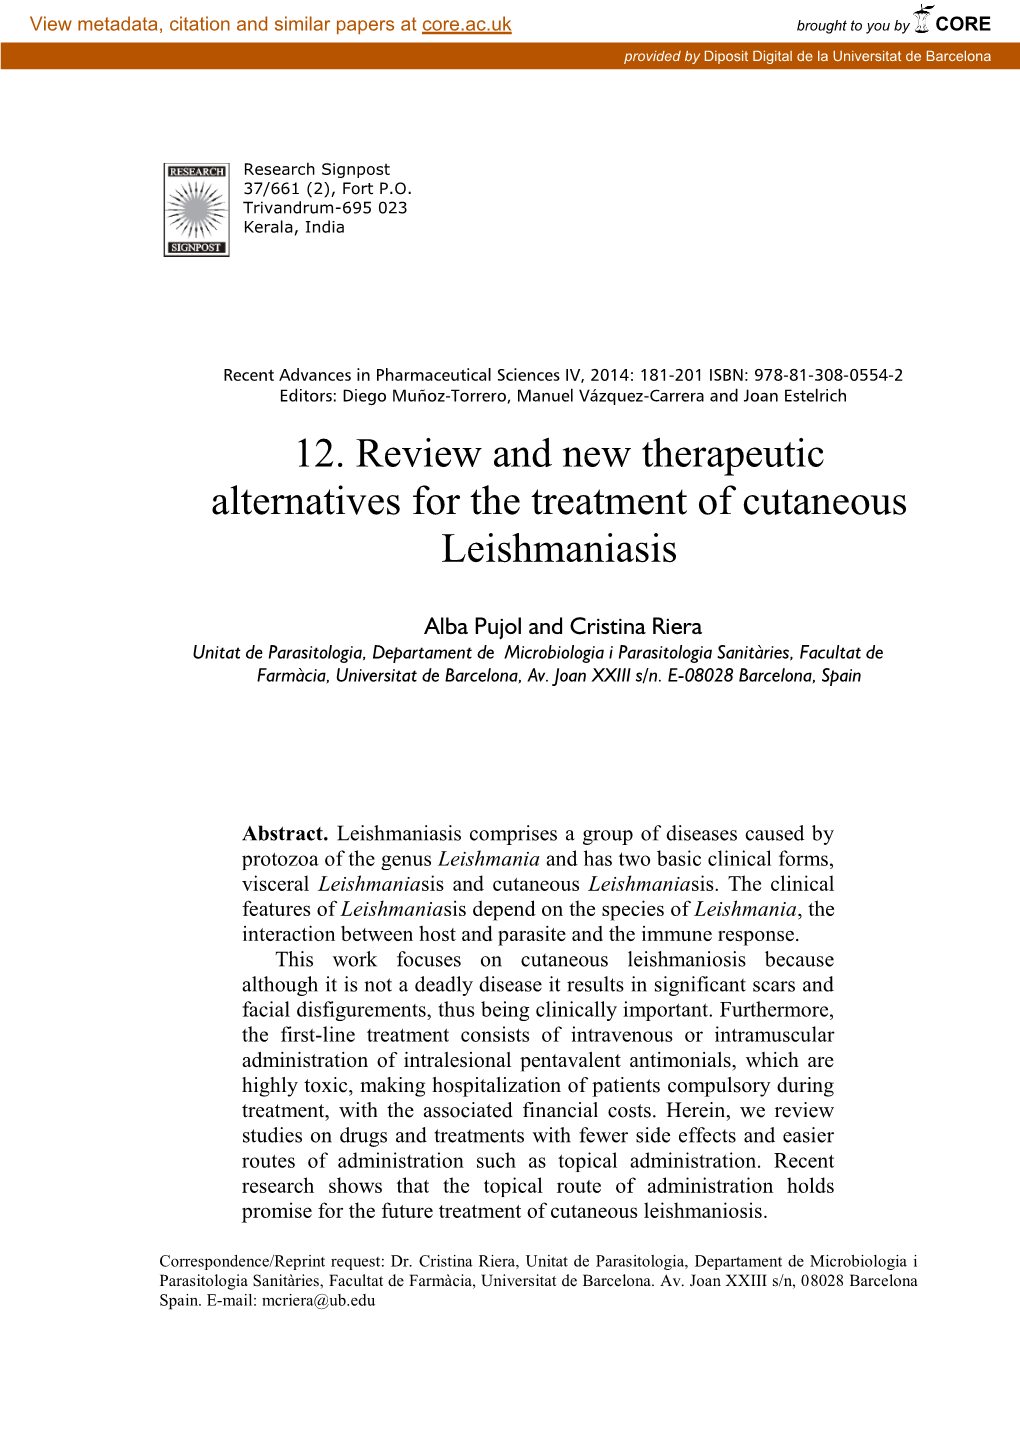 12. Review and New Therapeutic Alternatives for the Treatment of Cutaneous Leishmaniasis